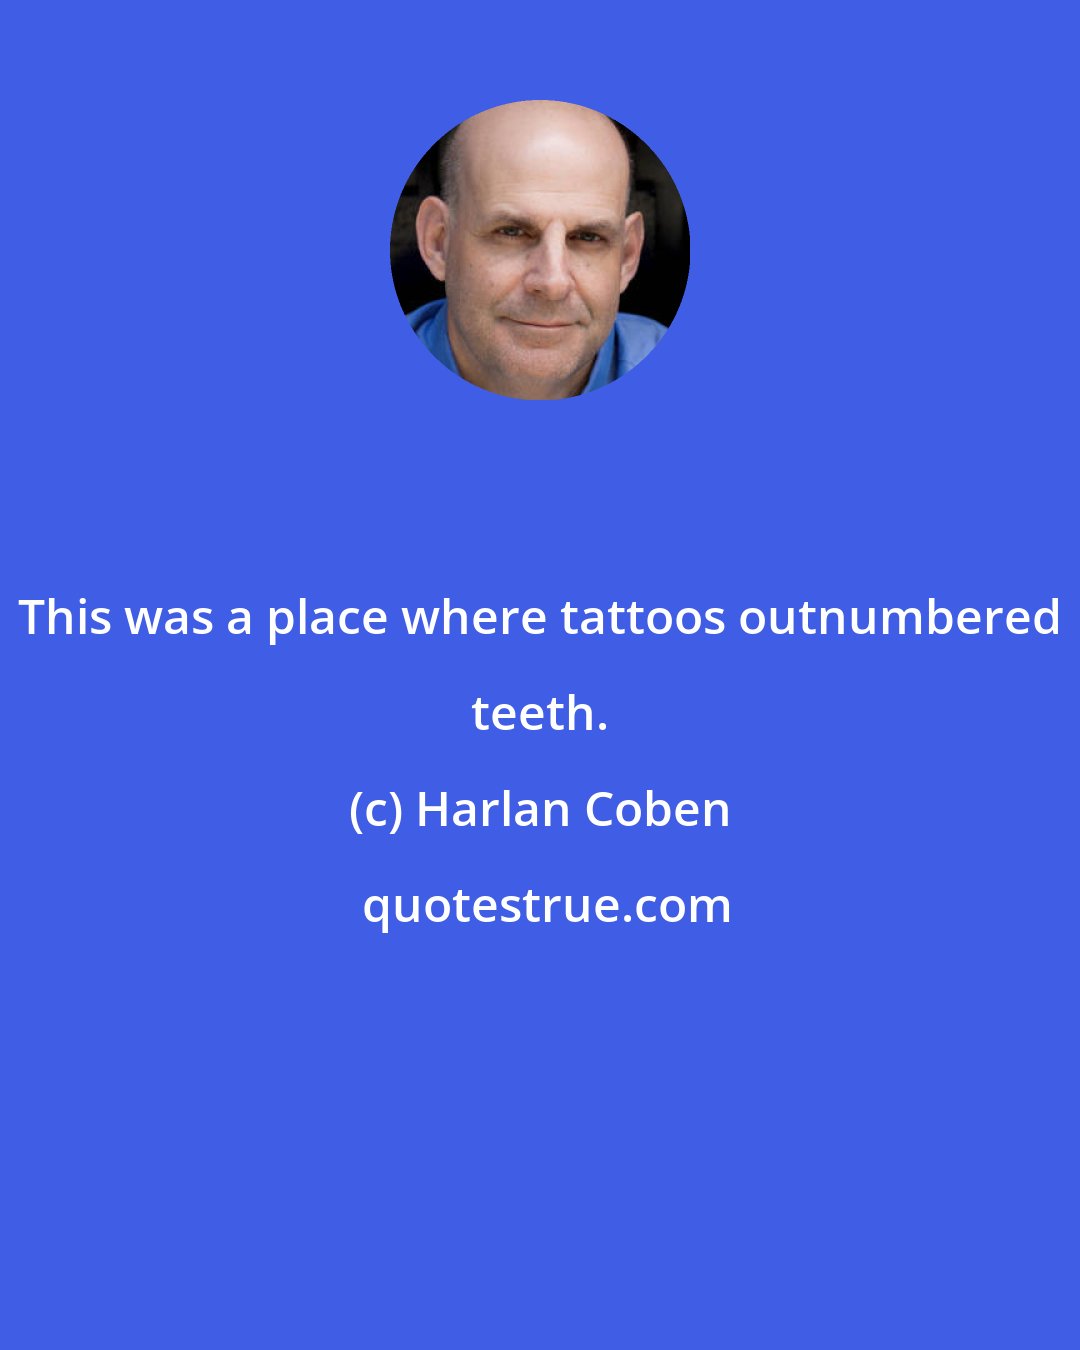 Harlan Coben: This was a place where tattoos outnumbered teeth.